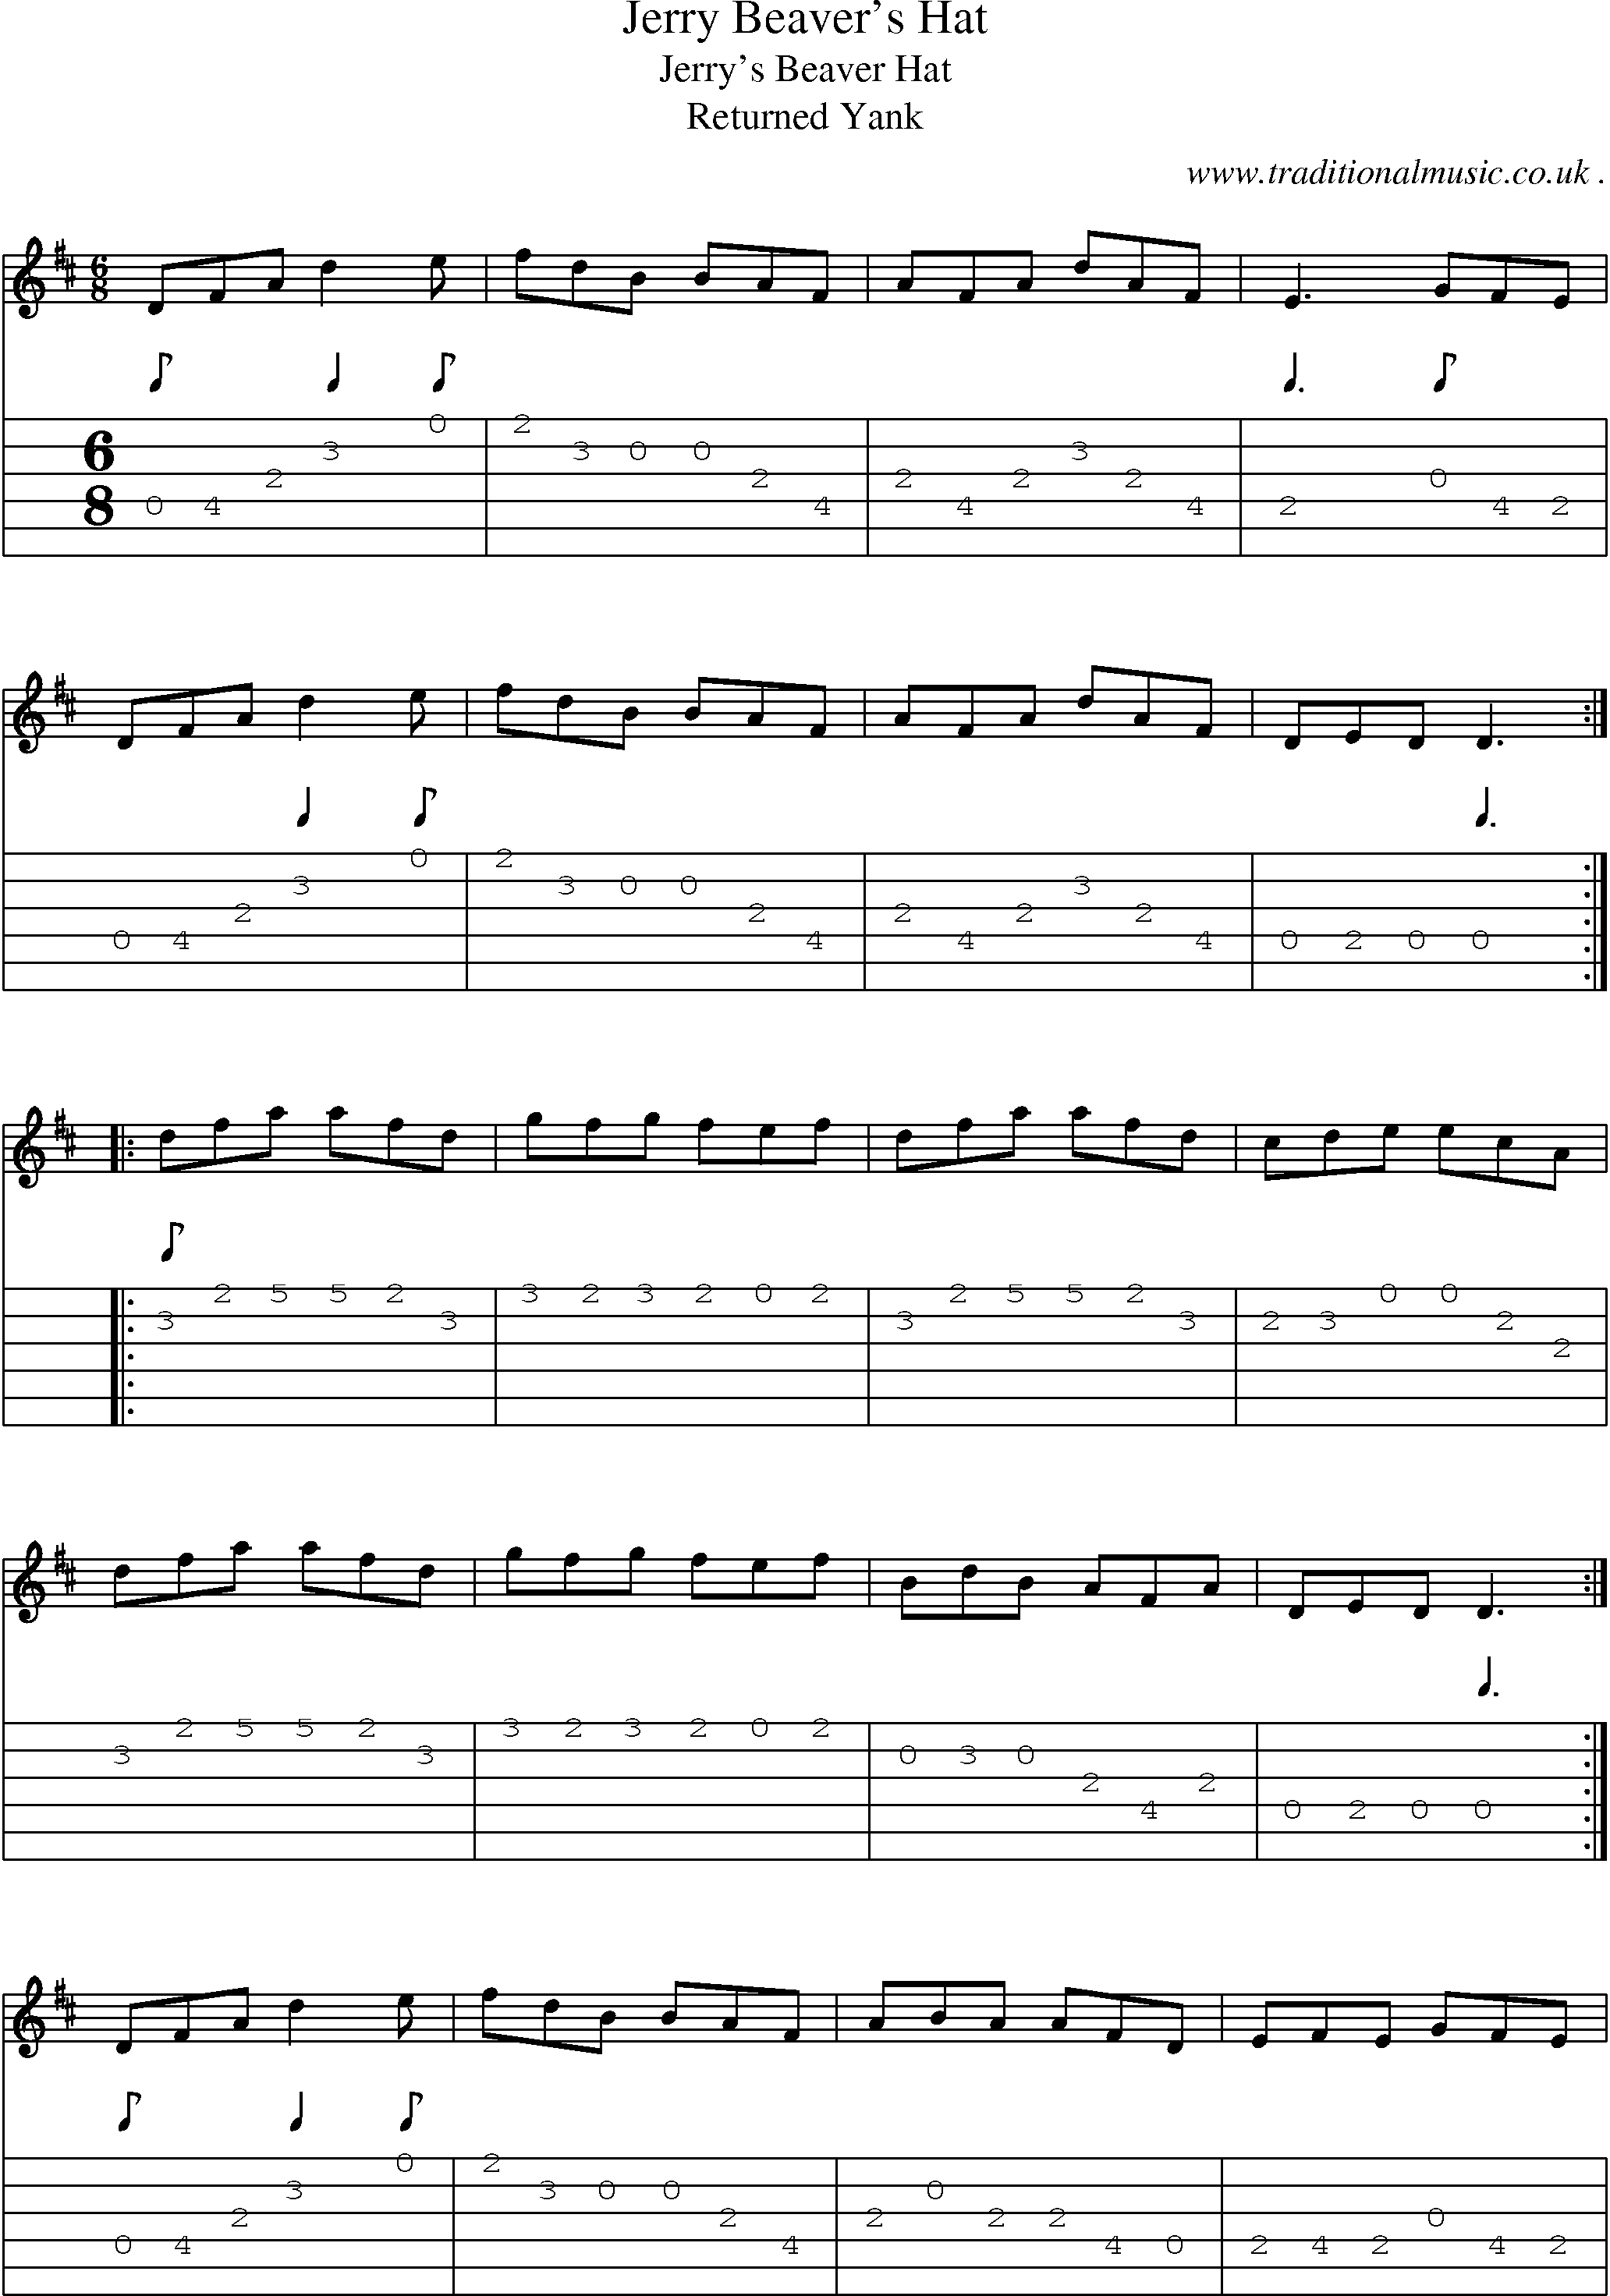 Sheet-Music and Guitar Tabs for Jerry Beavers Hat